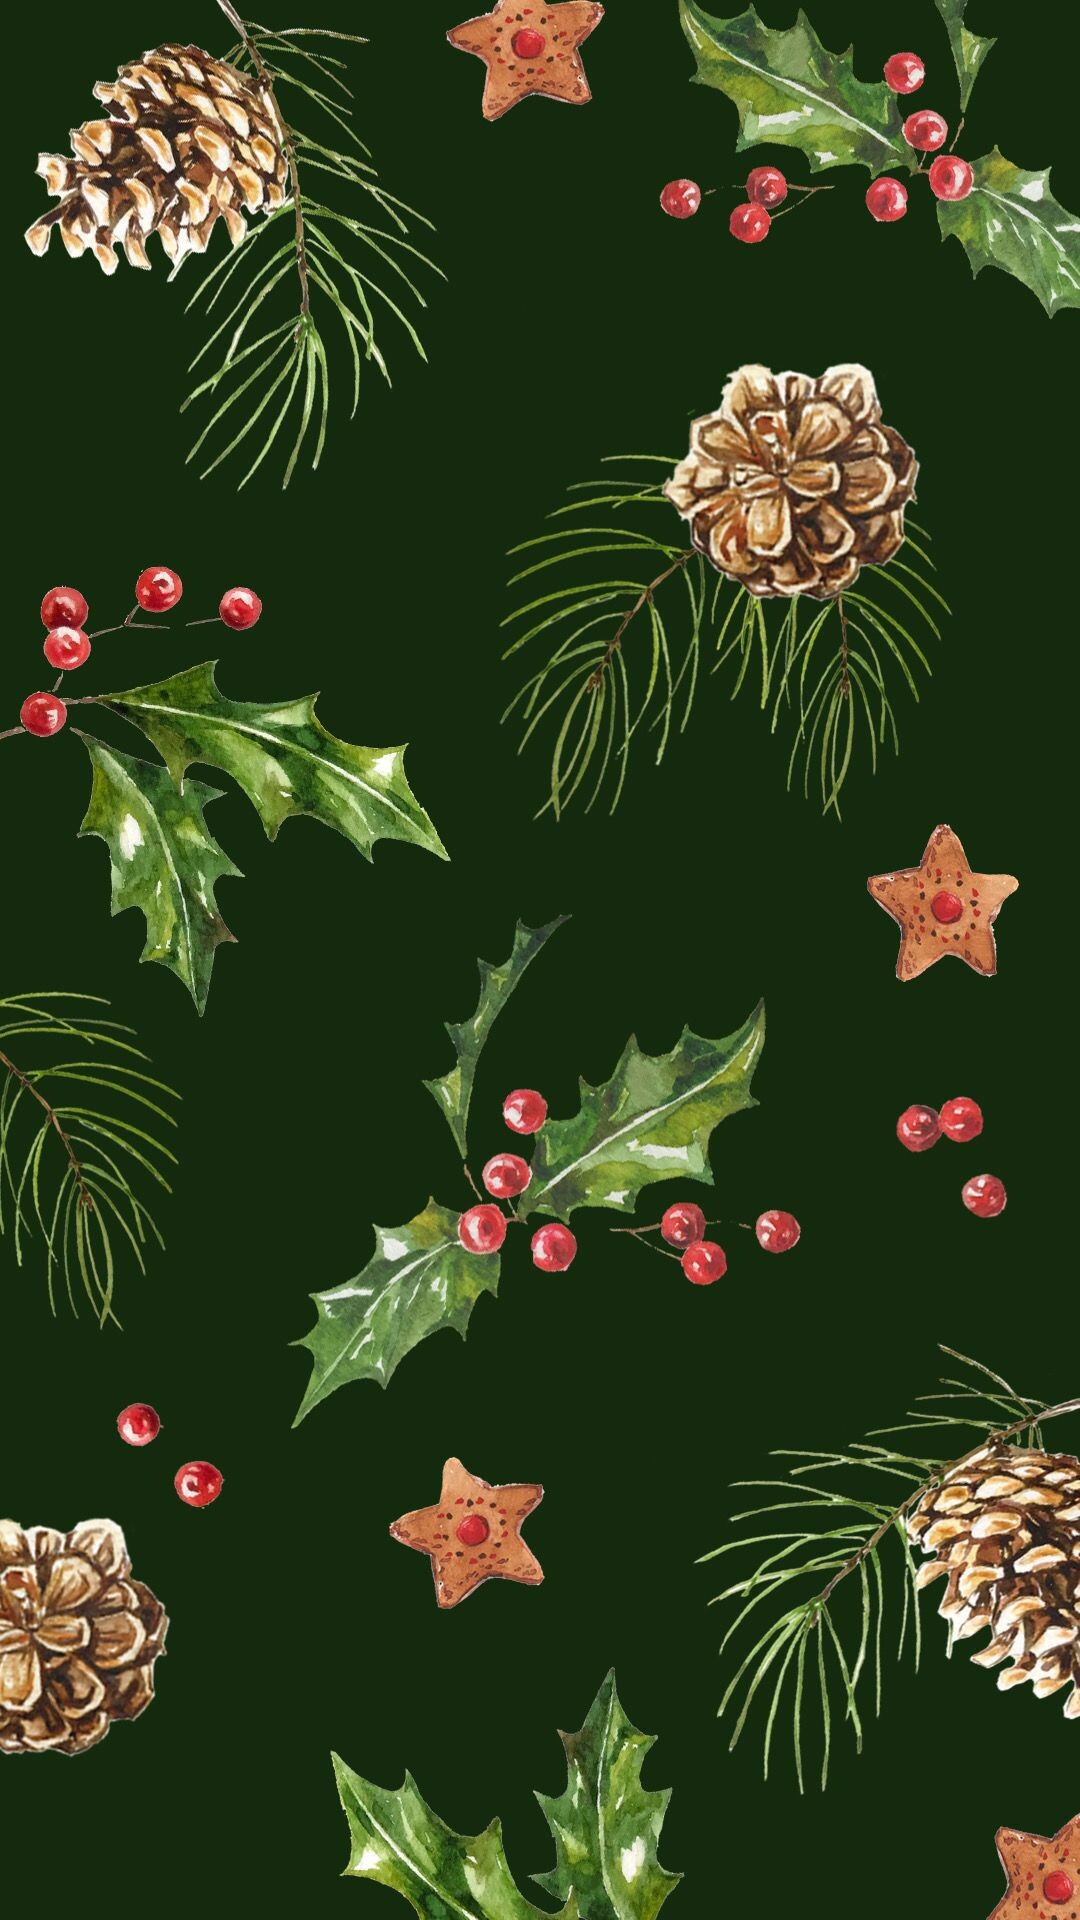 Mistletoe: Used for a variety of medical purposes, particularly for treating broken bone. 1080x1920 Full HD Wallpaper.